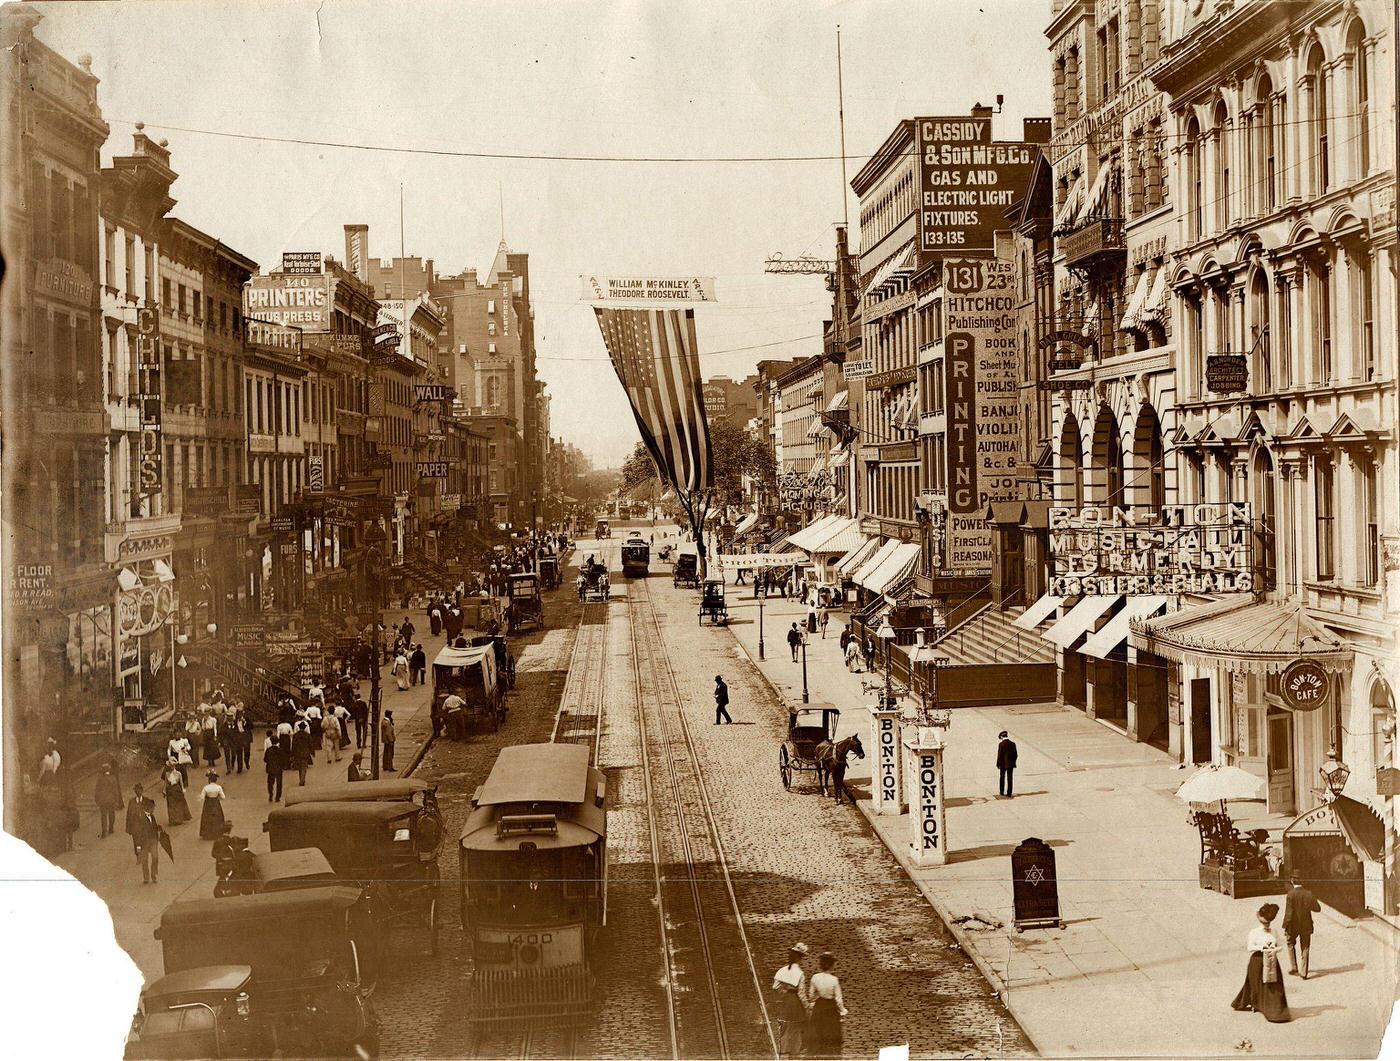 Summer Looking West On 23Rd Street From Sixth Avenue, Bon Ton Music Hall On Right, New York City, 1900